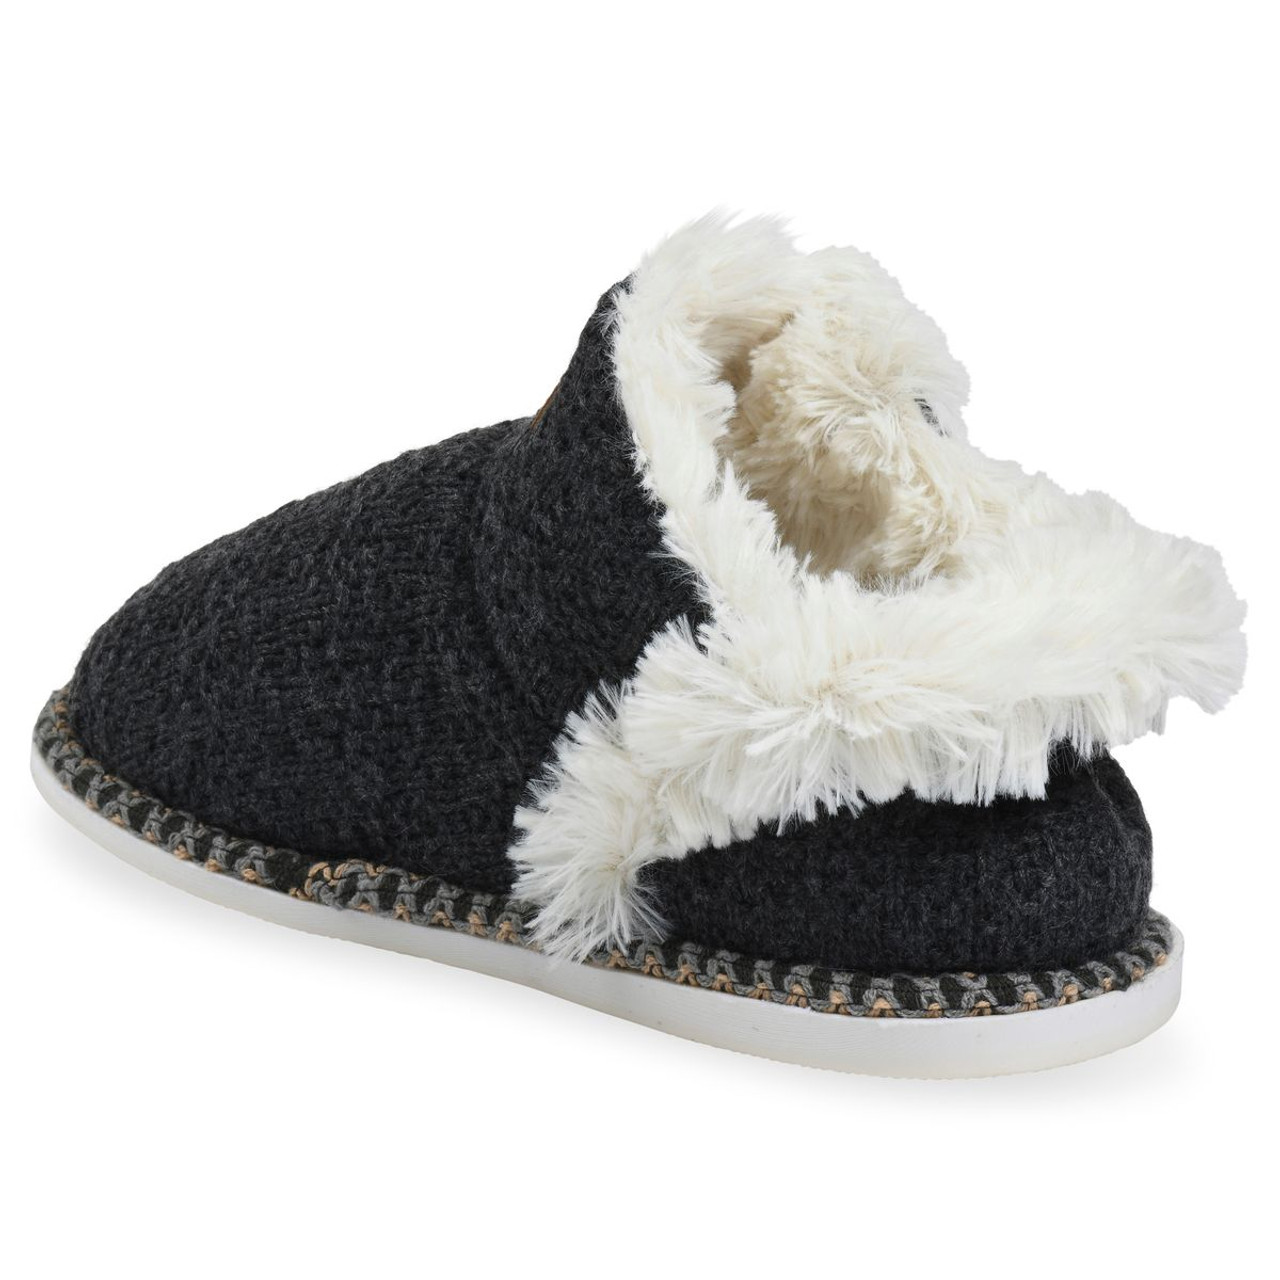 GaaHuu™ Women's Textured Knit Slipper Boot product image